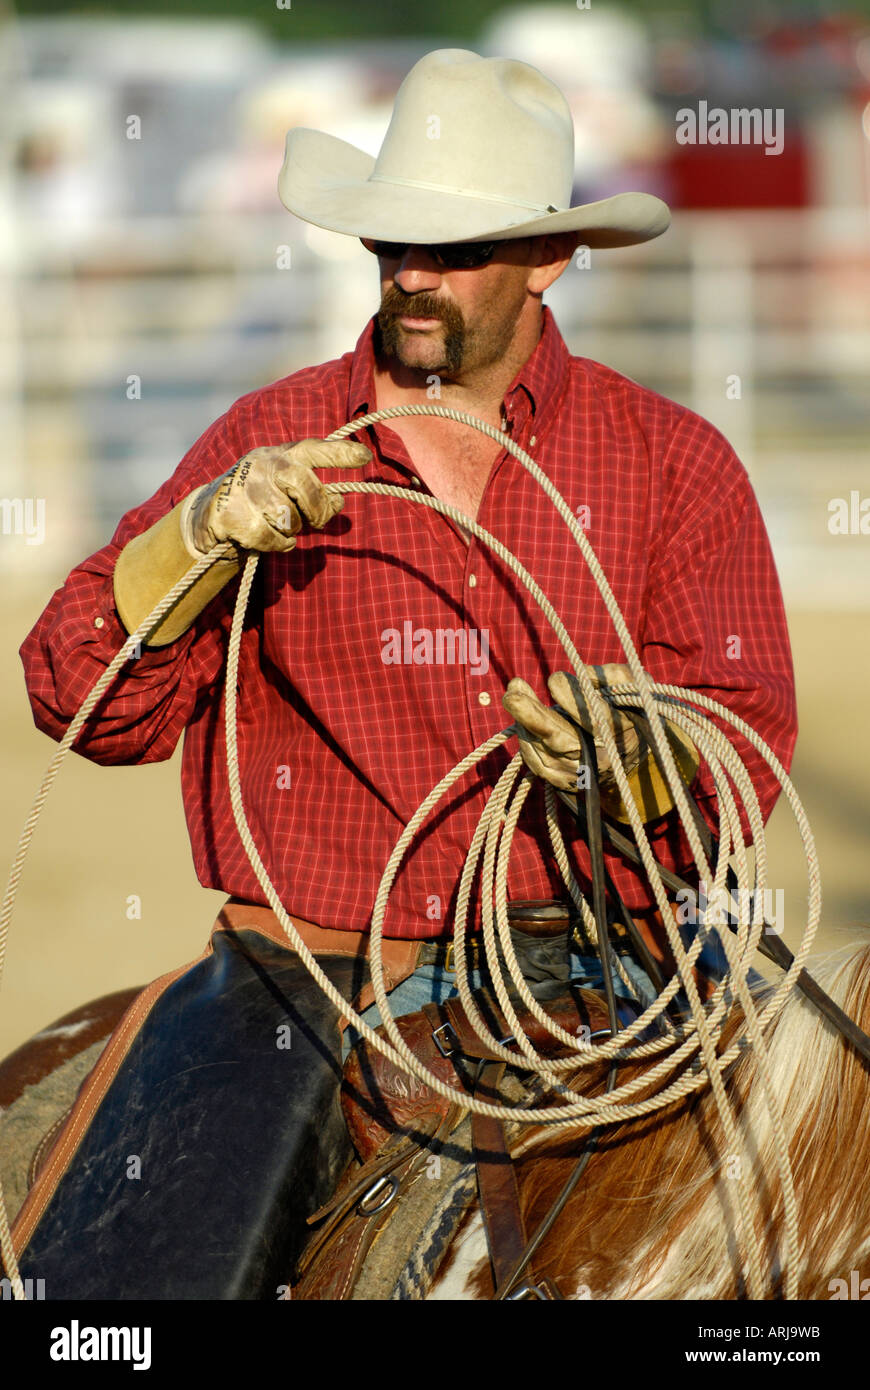 Cowboy participating in a rodeo event readies his rope for roping event Stock Photo